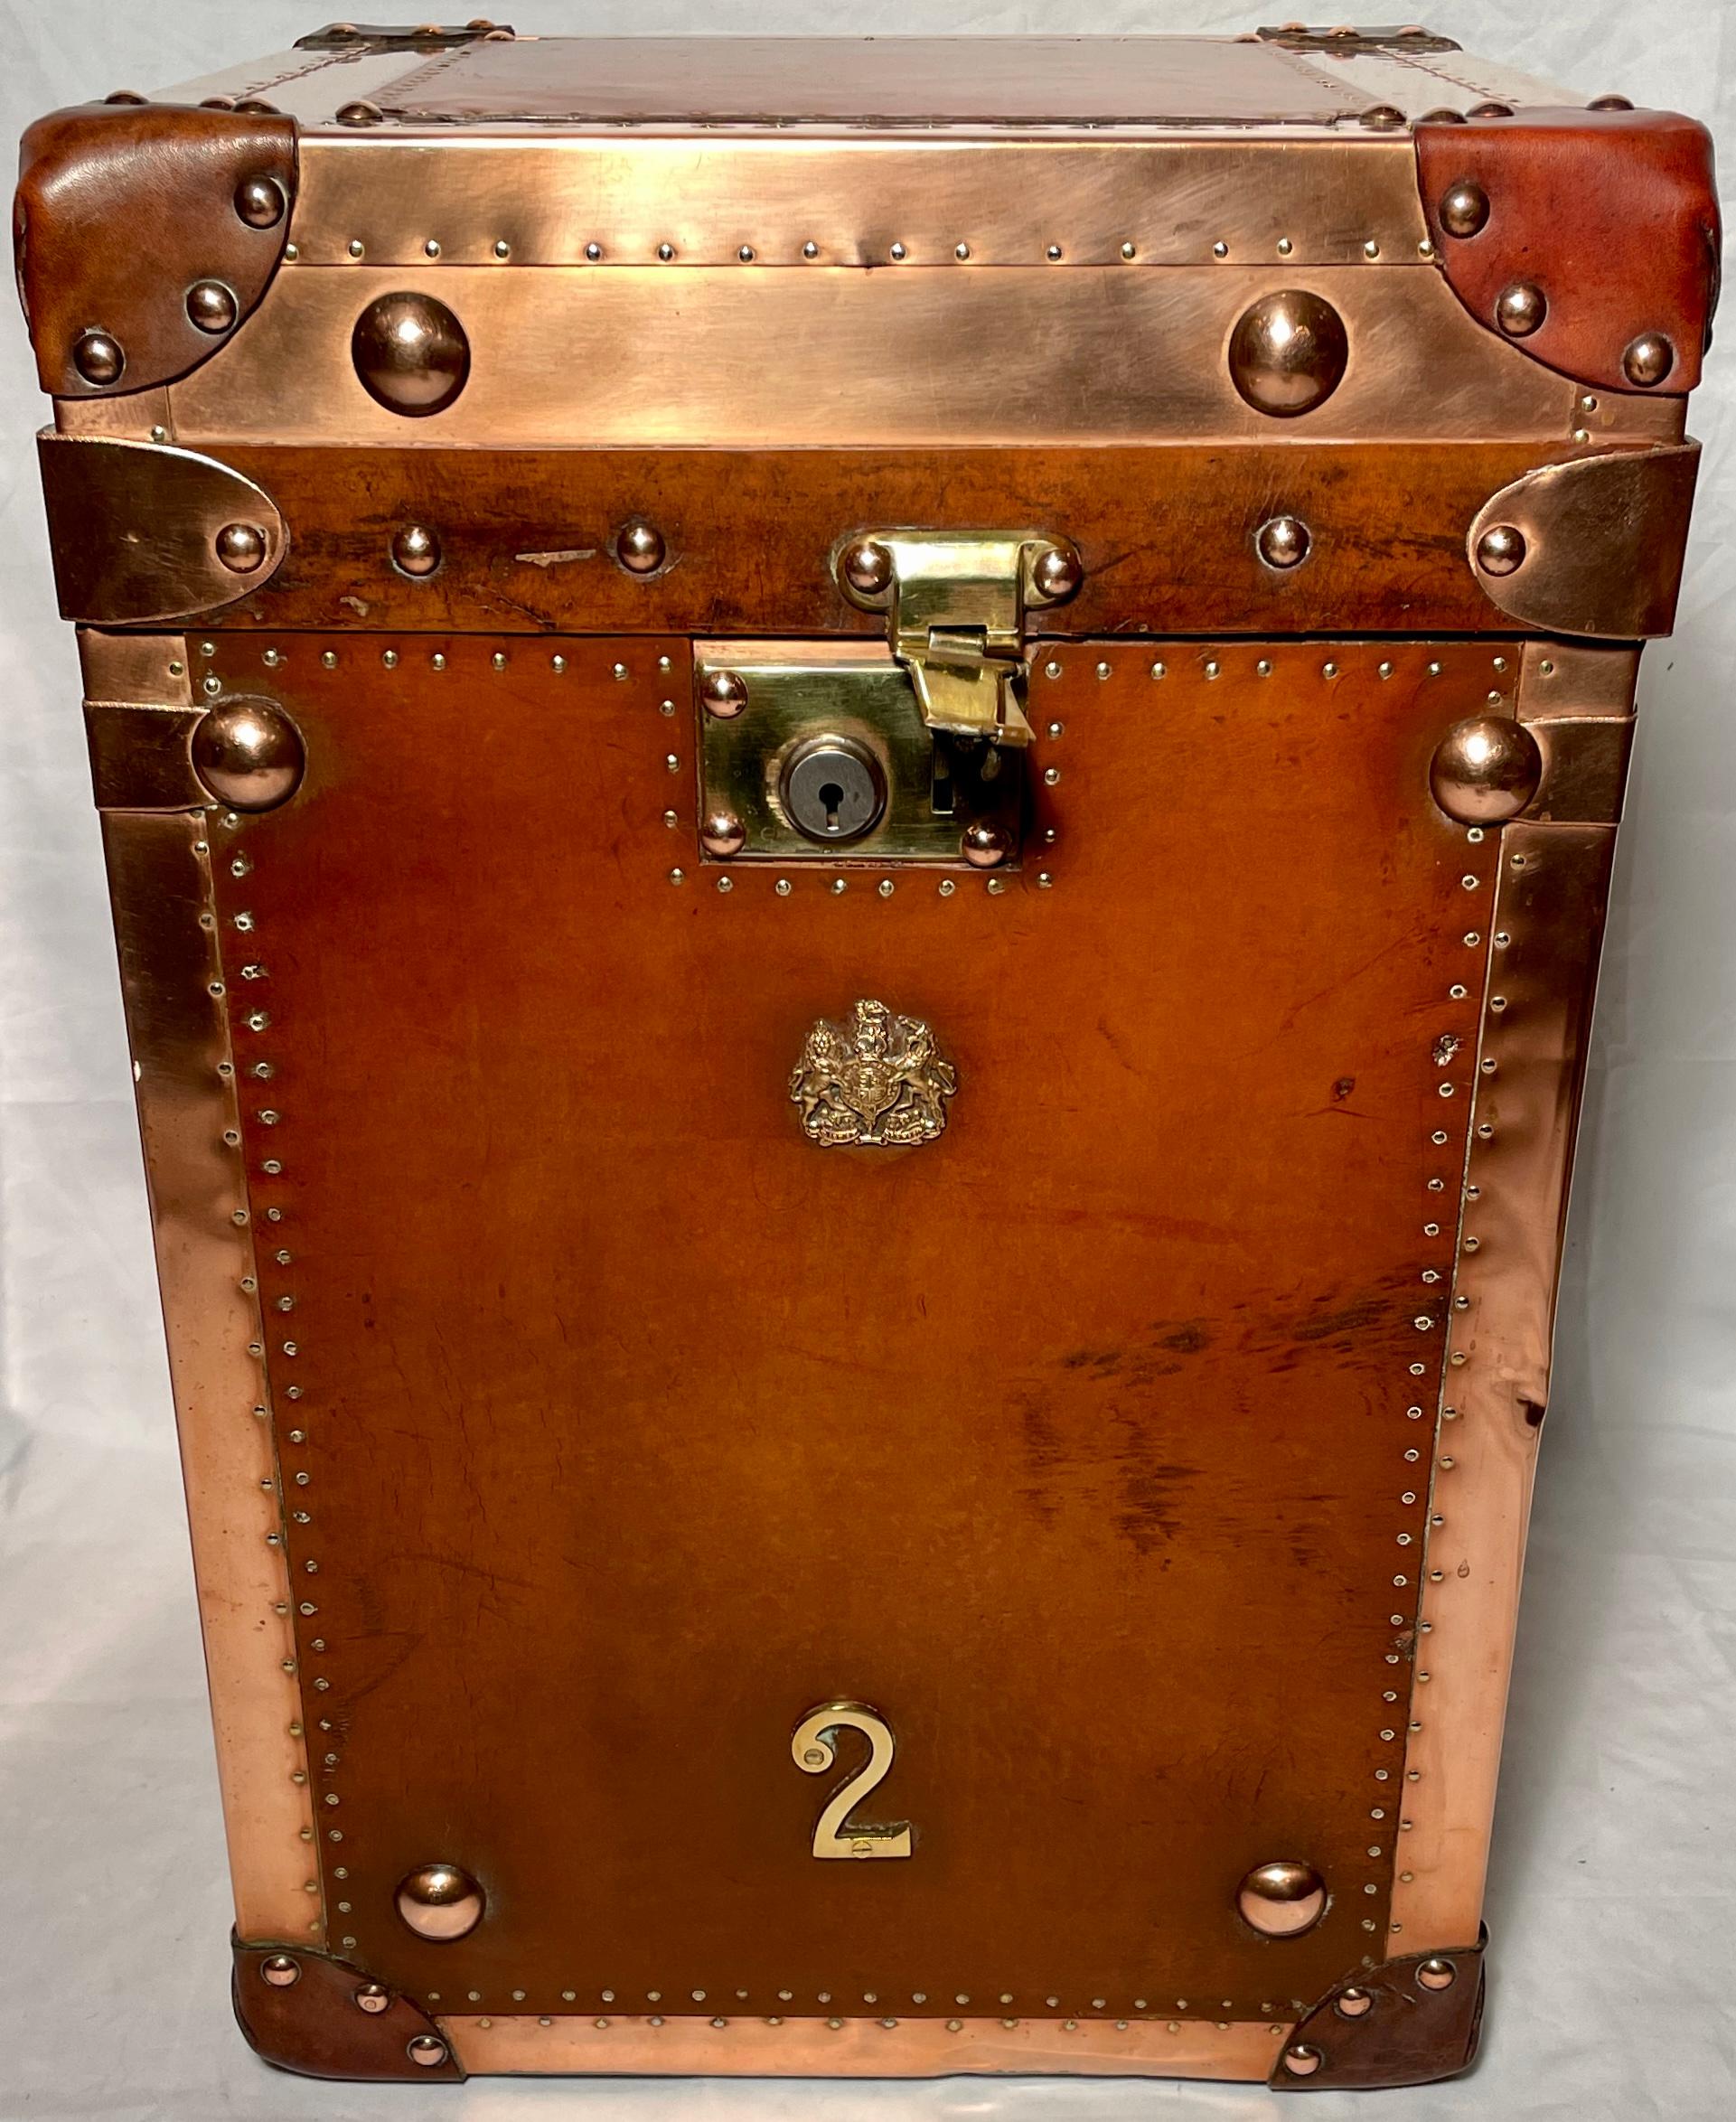 Pair Antique British Copper & Leather Trunks w/ Royal Corps of Marines Insignia 1